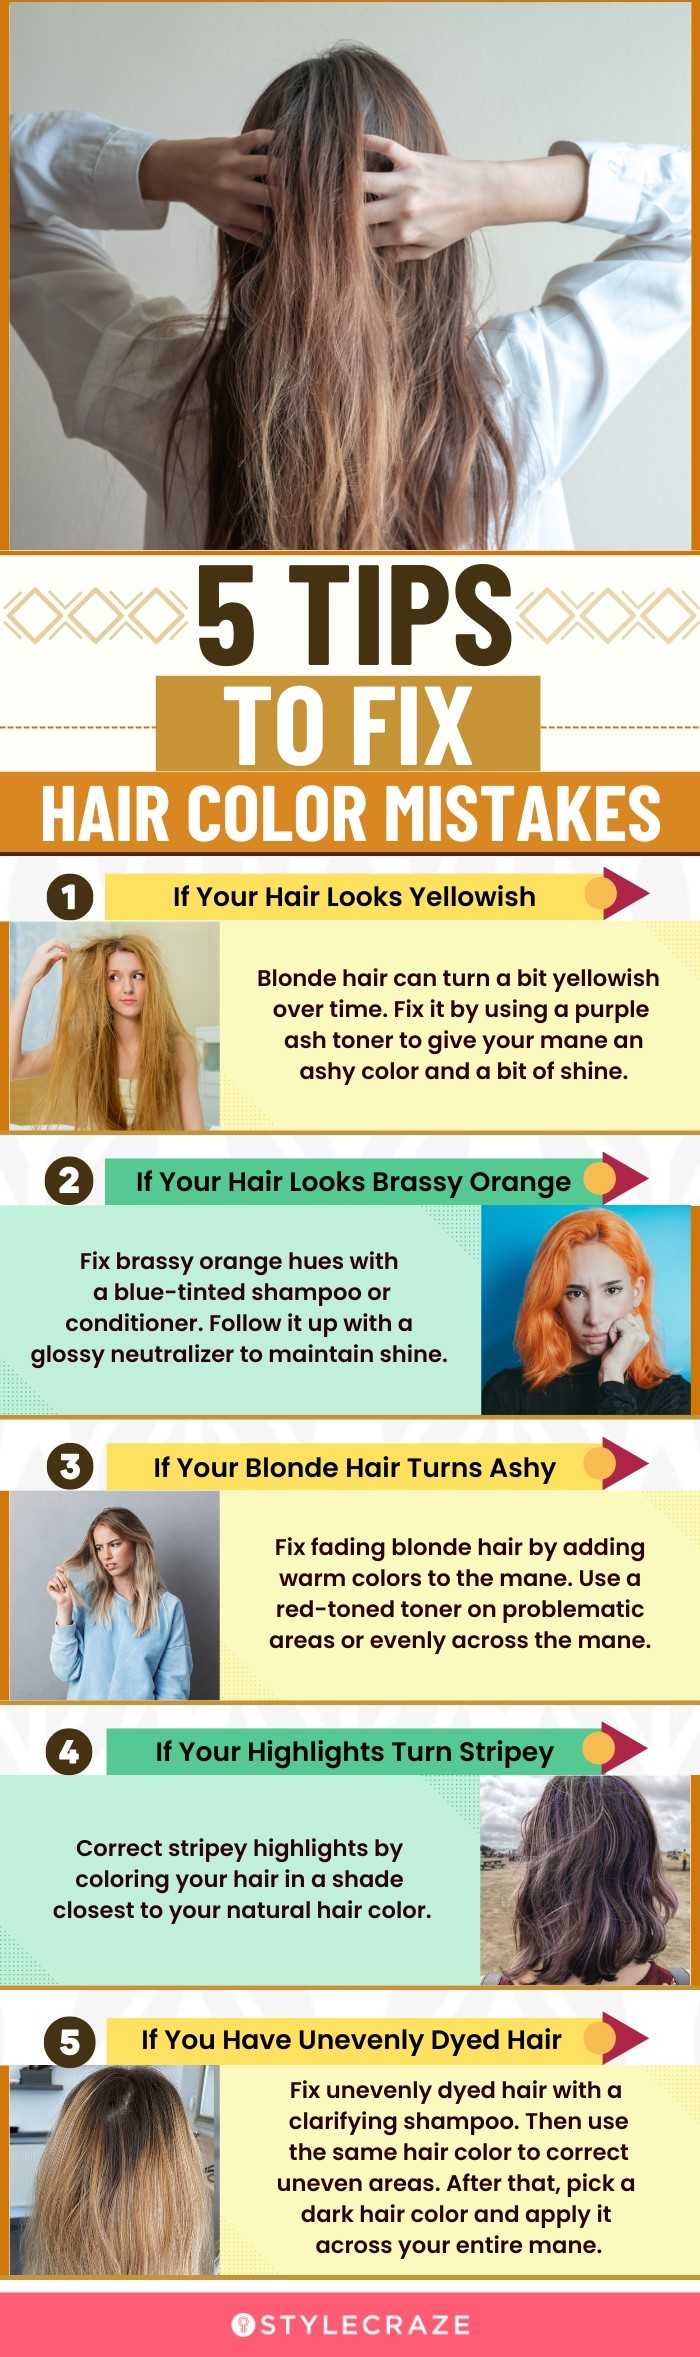 Color Corrections: How To Fix Hair Dye Disasters At Home